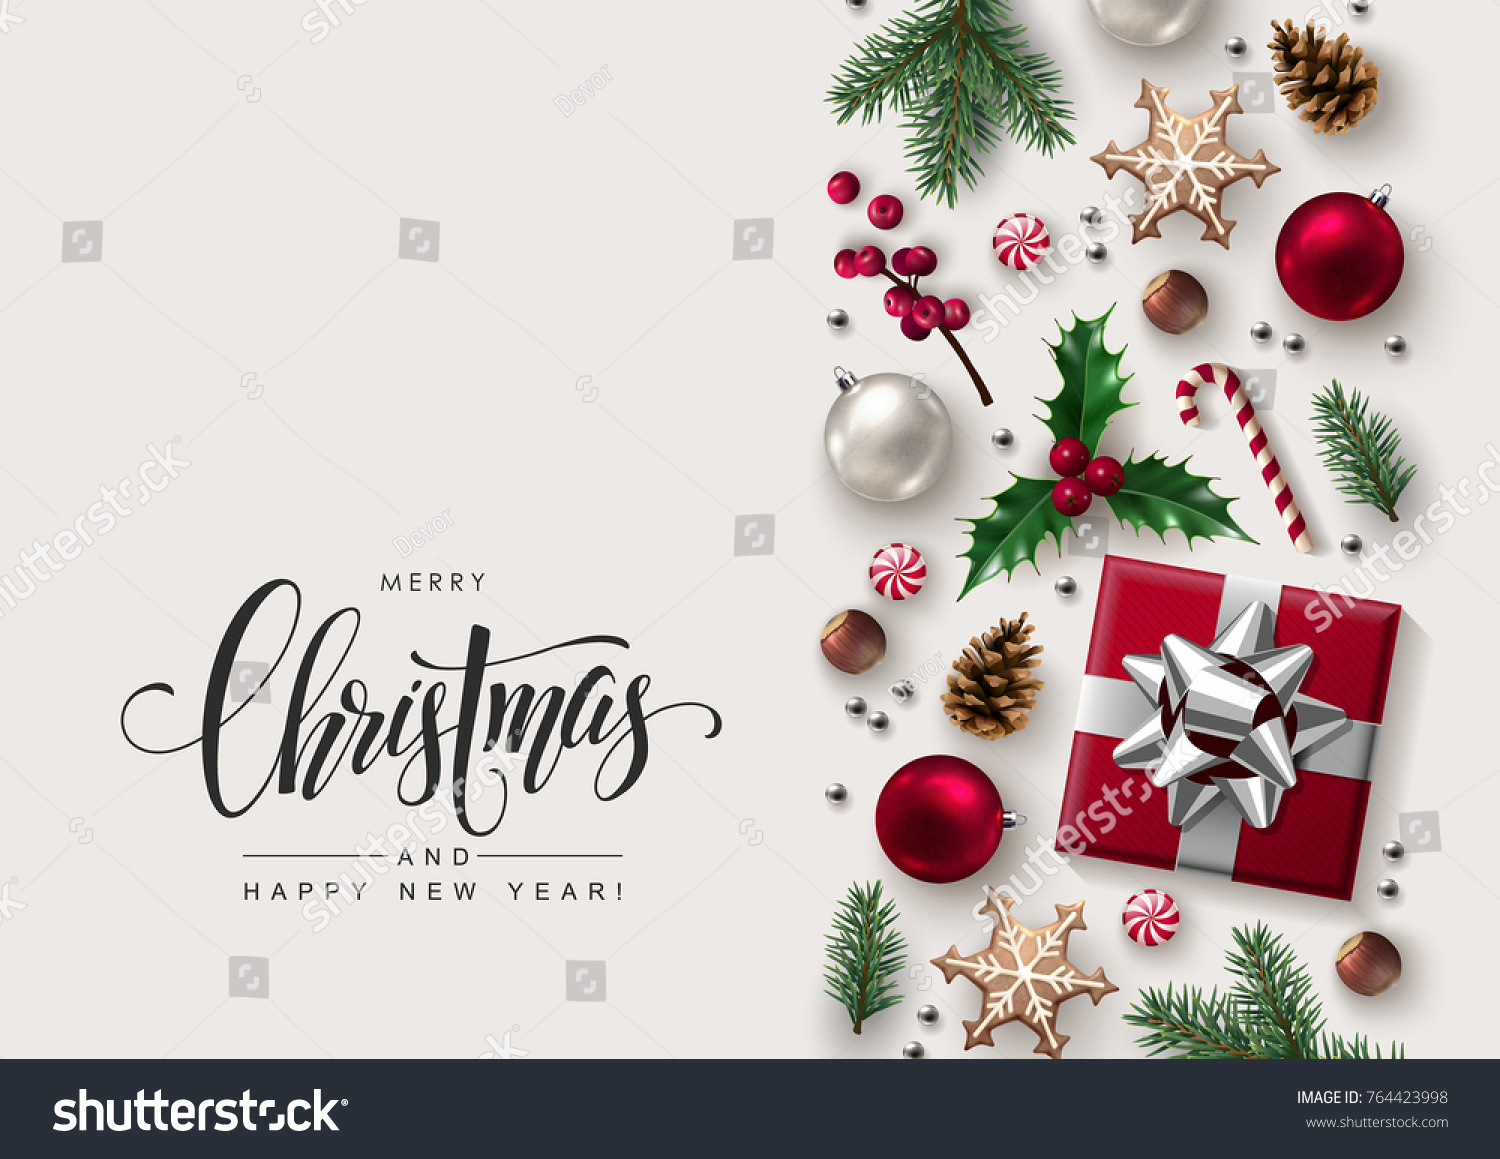 Christmas Decorative Border made of Festive Elements with Calligraphic Seasons Wishes #764423998